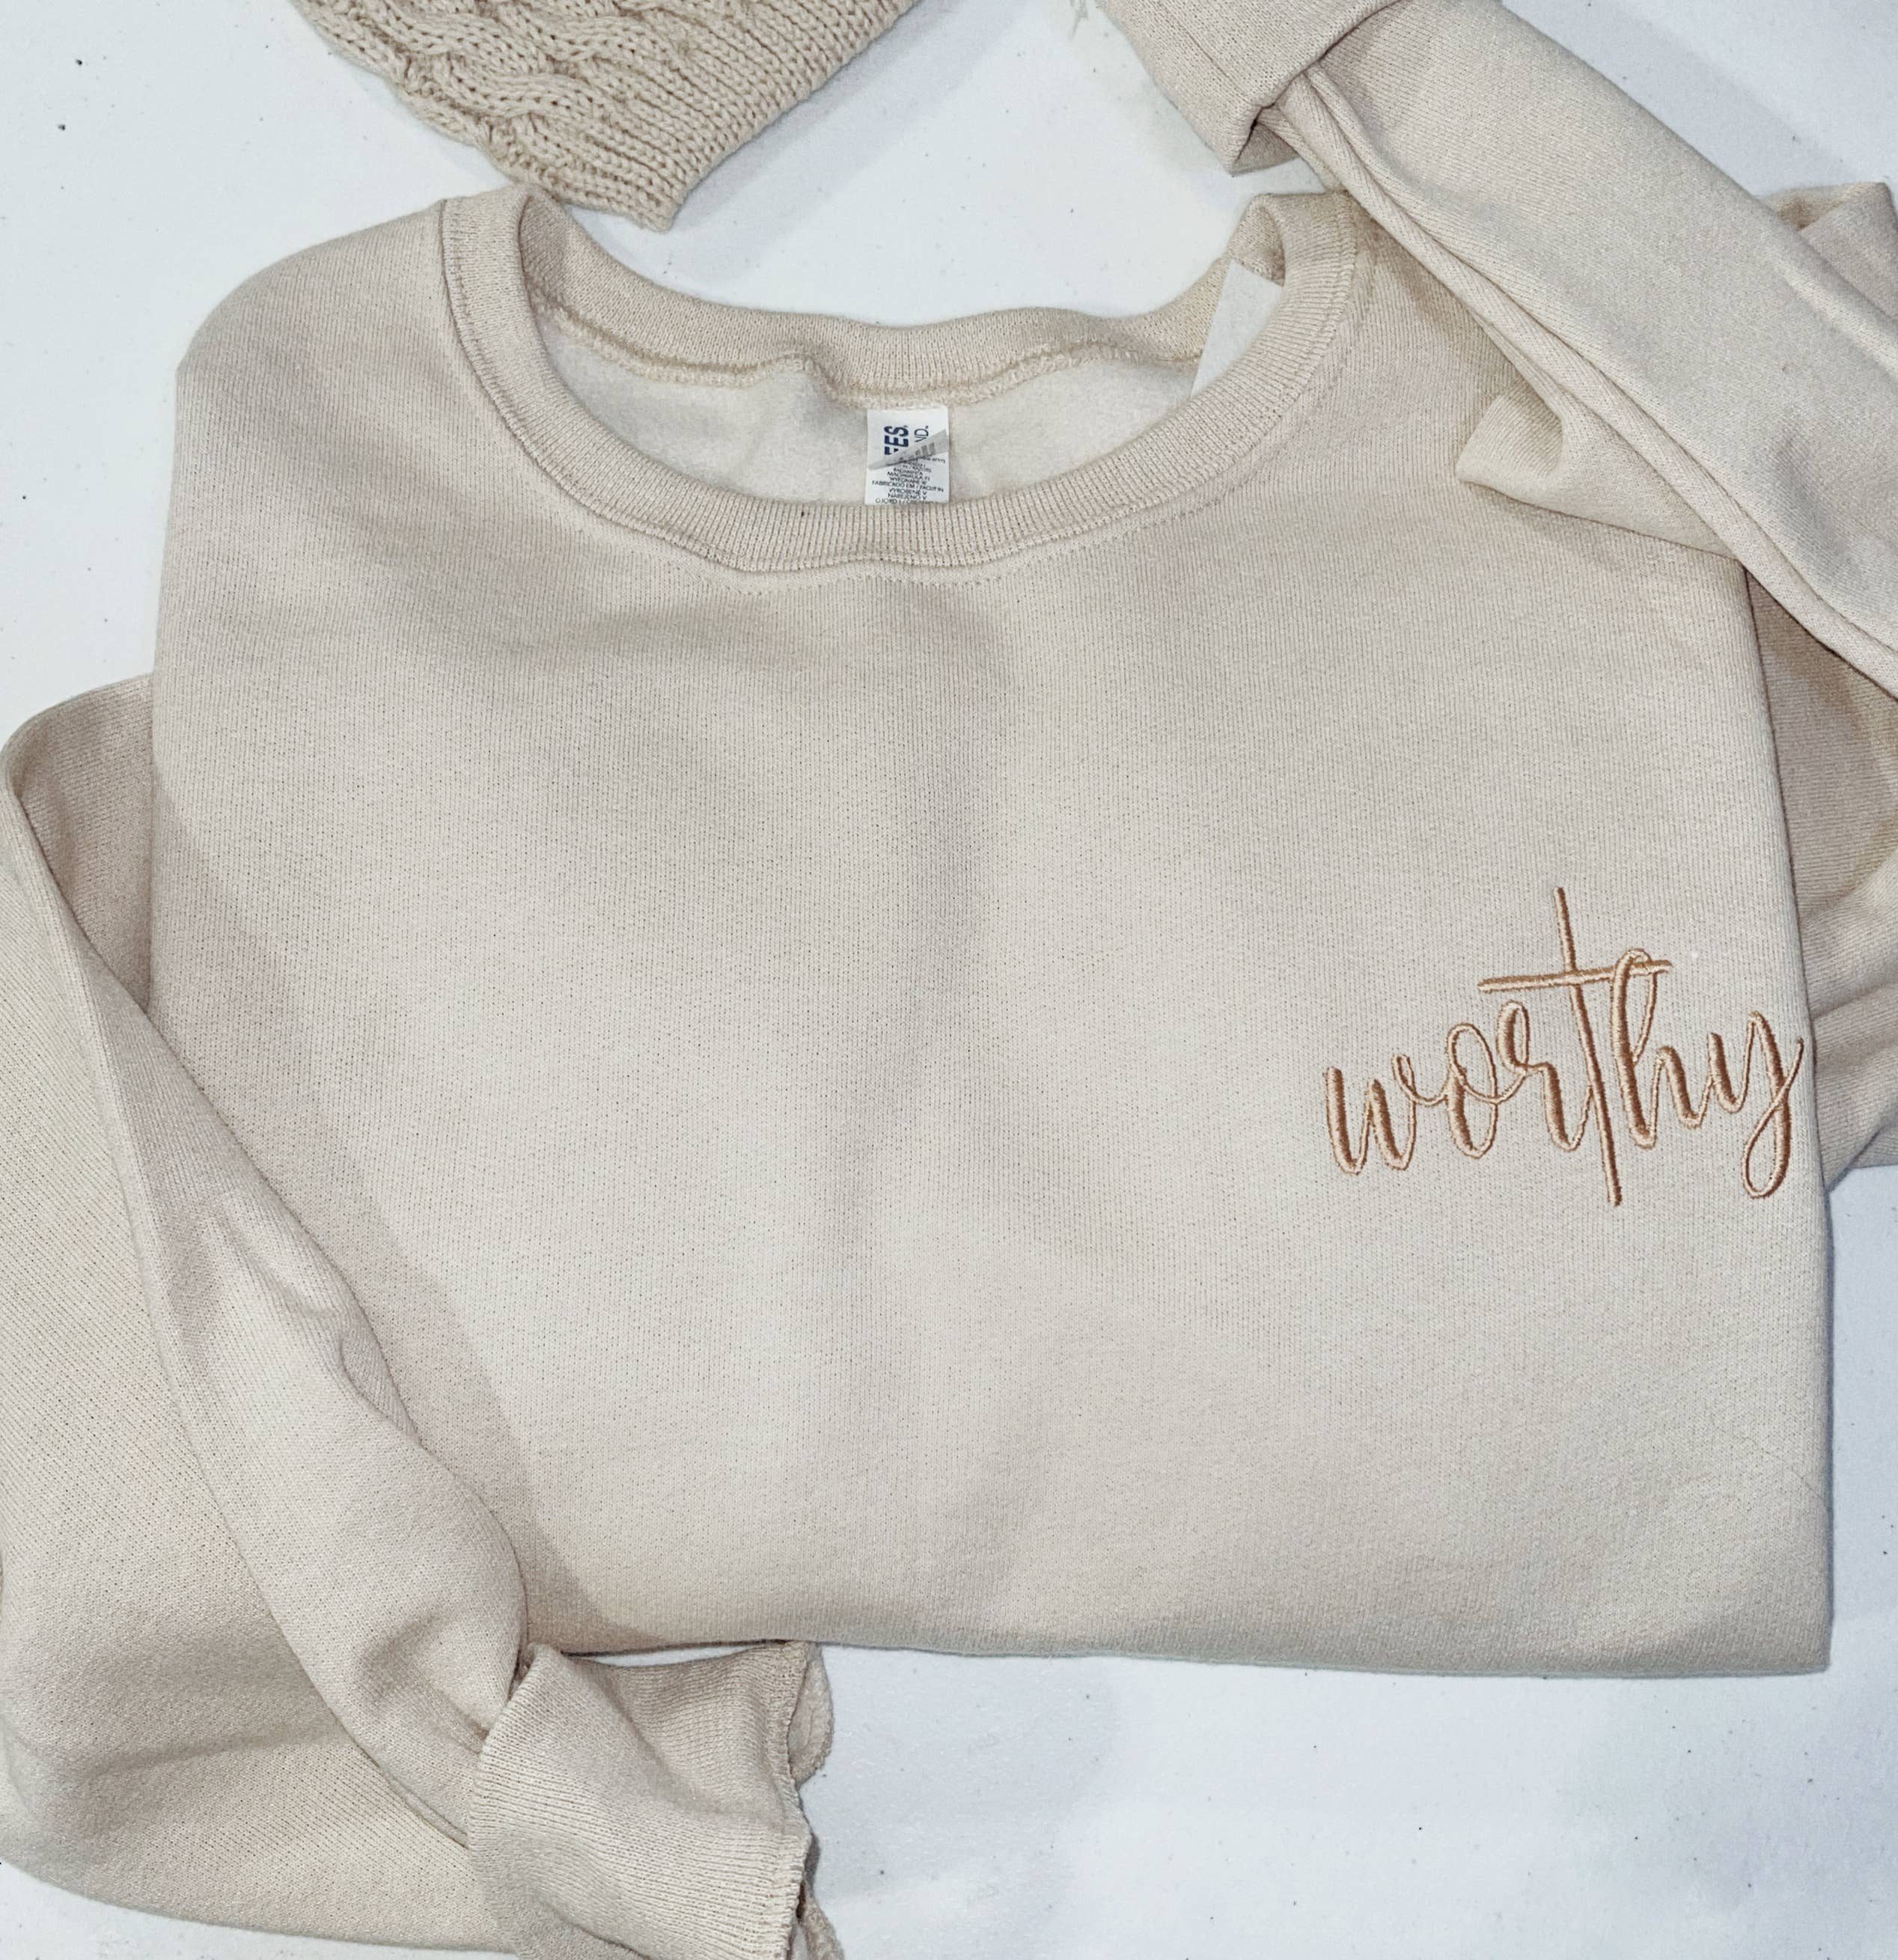 Worthy Embroidered Sweatshirt - Forever Western Boutique